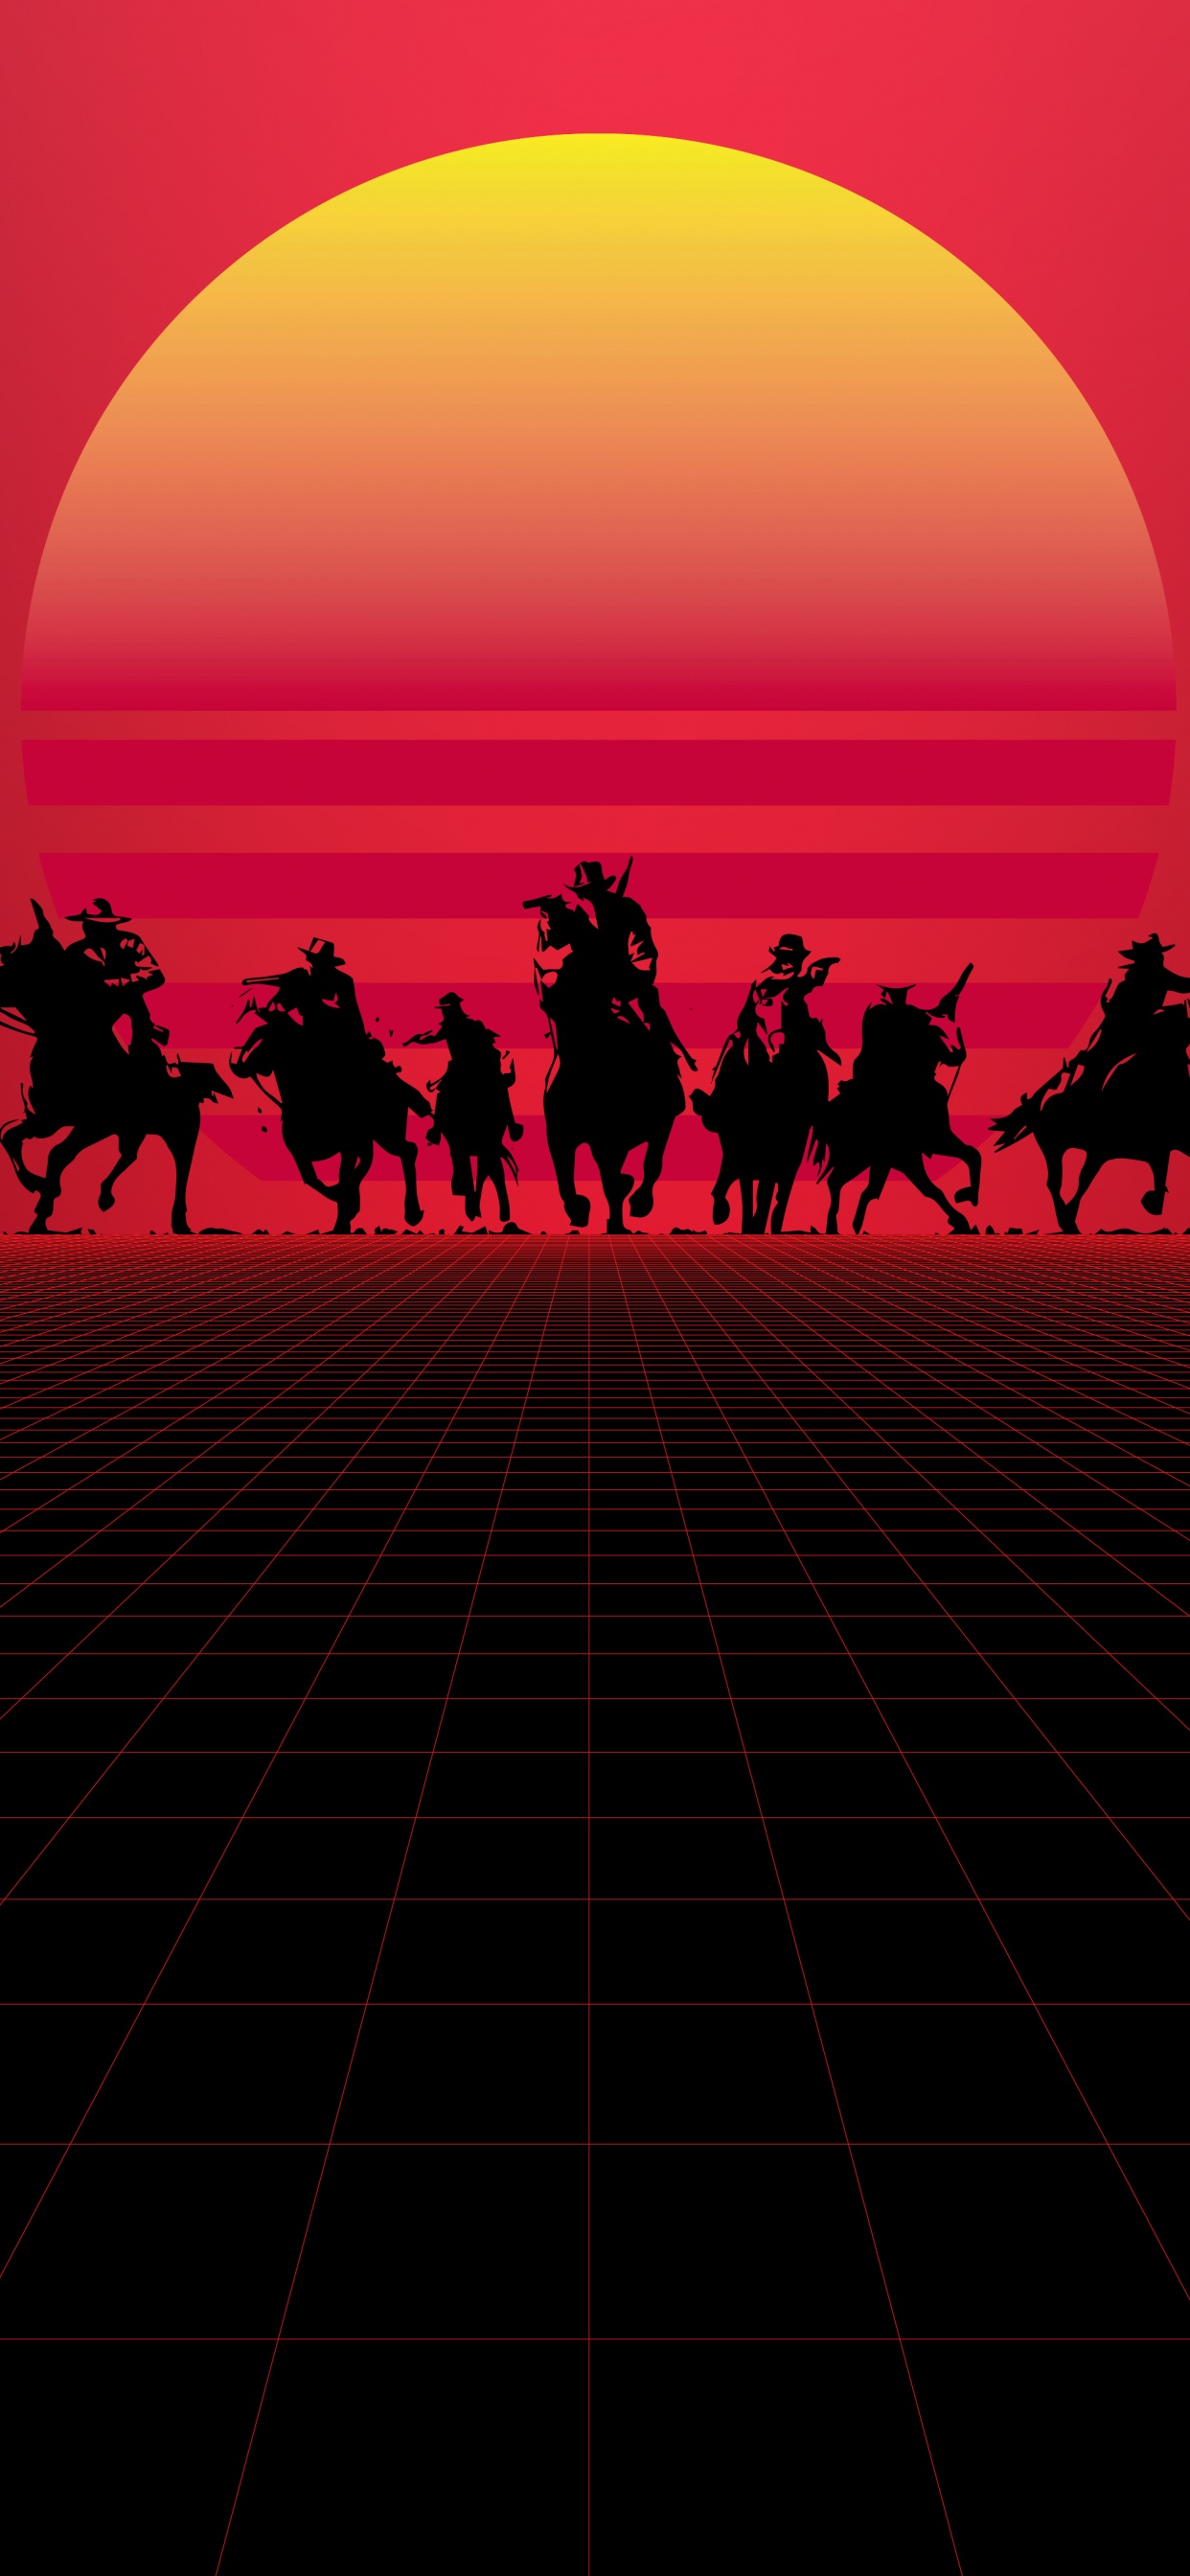 Red Dead Redemption, Red Dead Redemption 2, Red, Silhouette, Pack Animal. Wallpaper in 1242x2688 Resolution